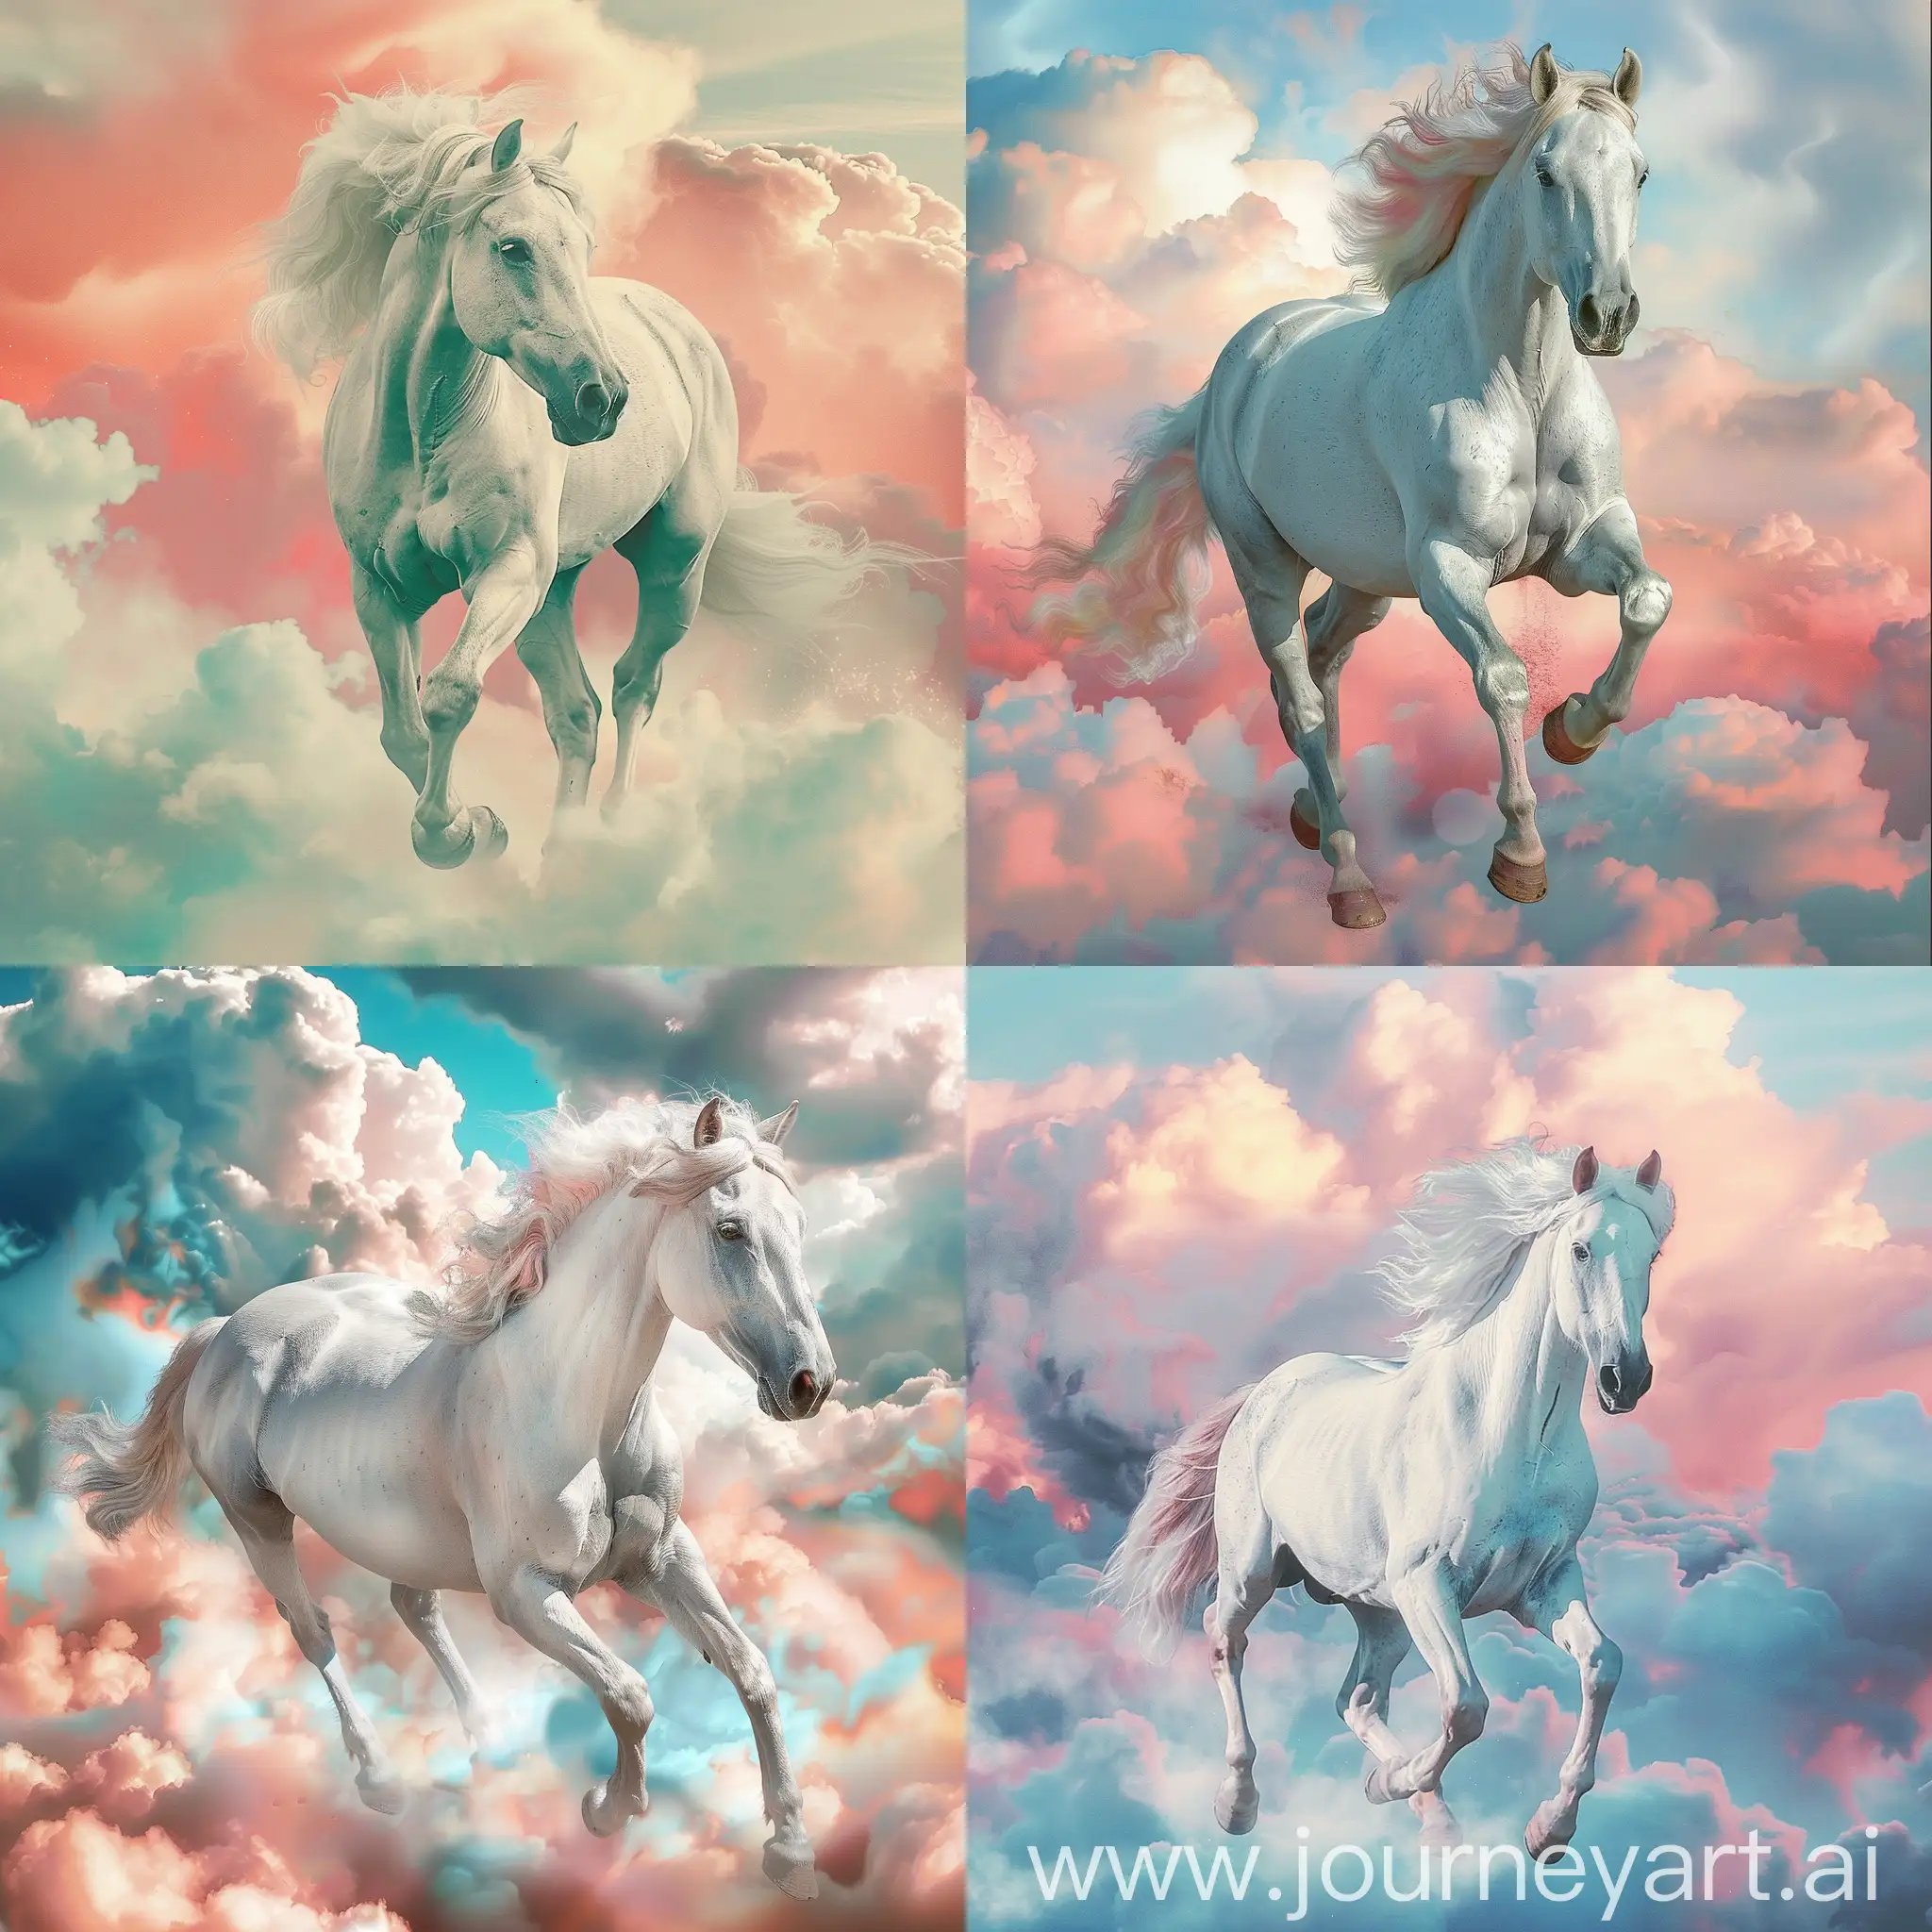 A white horse with a ruffled mane and a cloudy sky is trotting on pink and blue clouds in an emotional space.